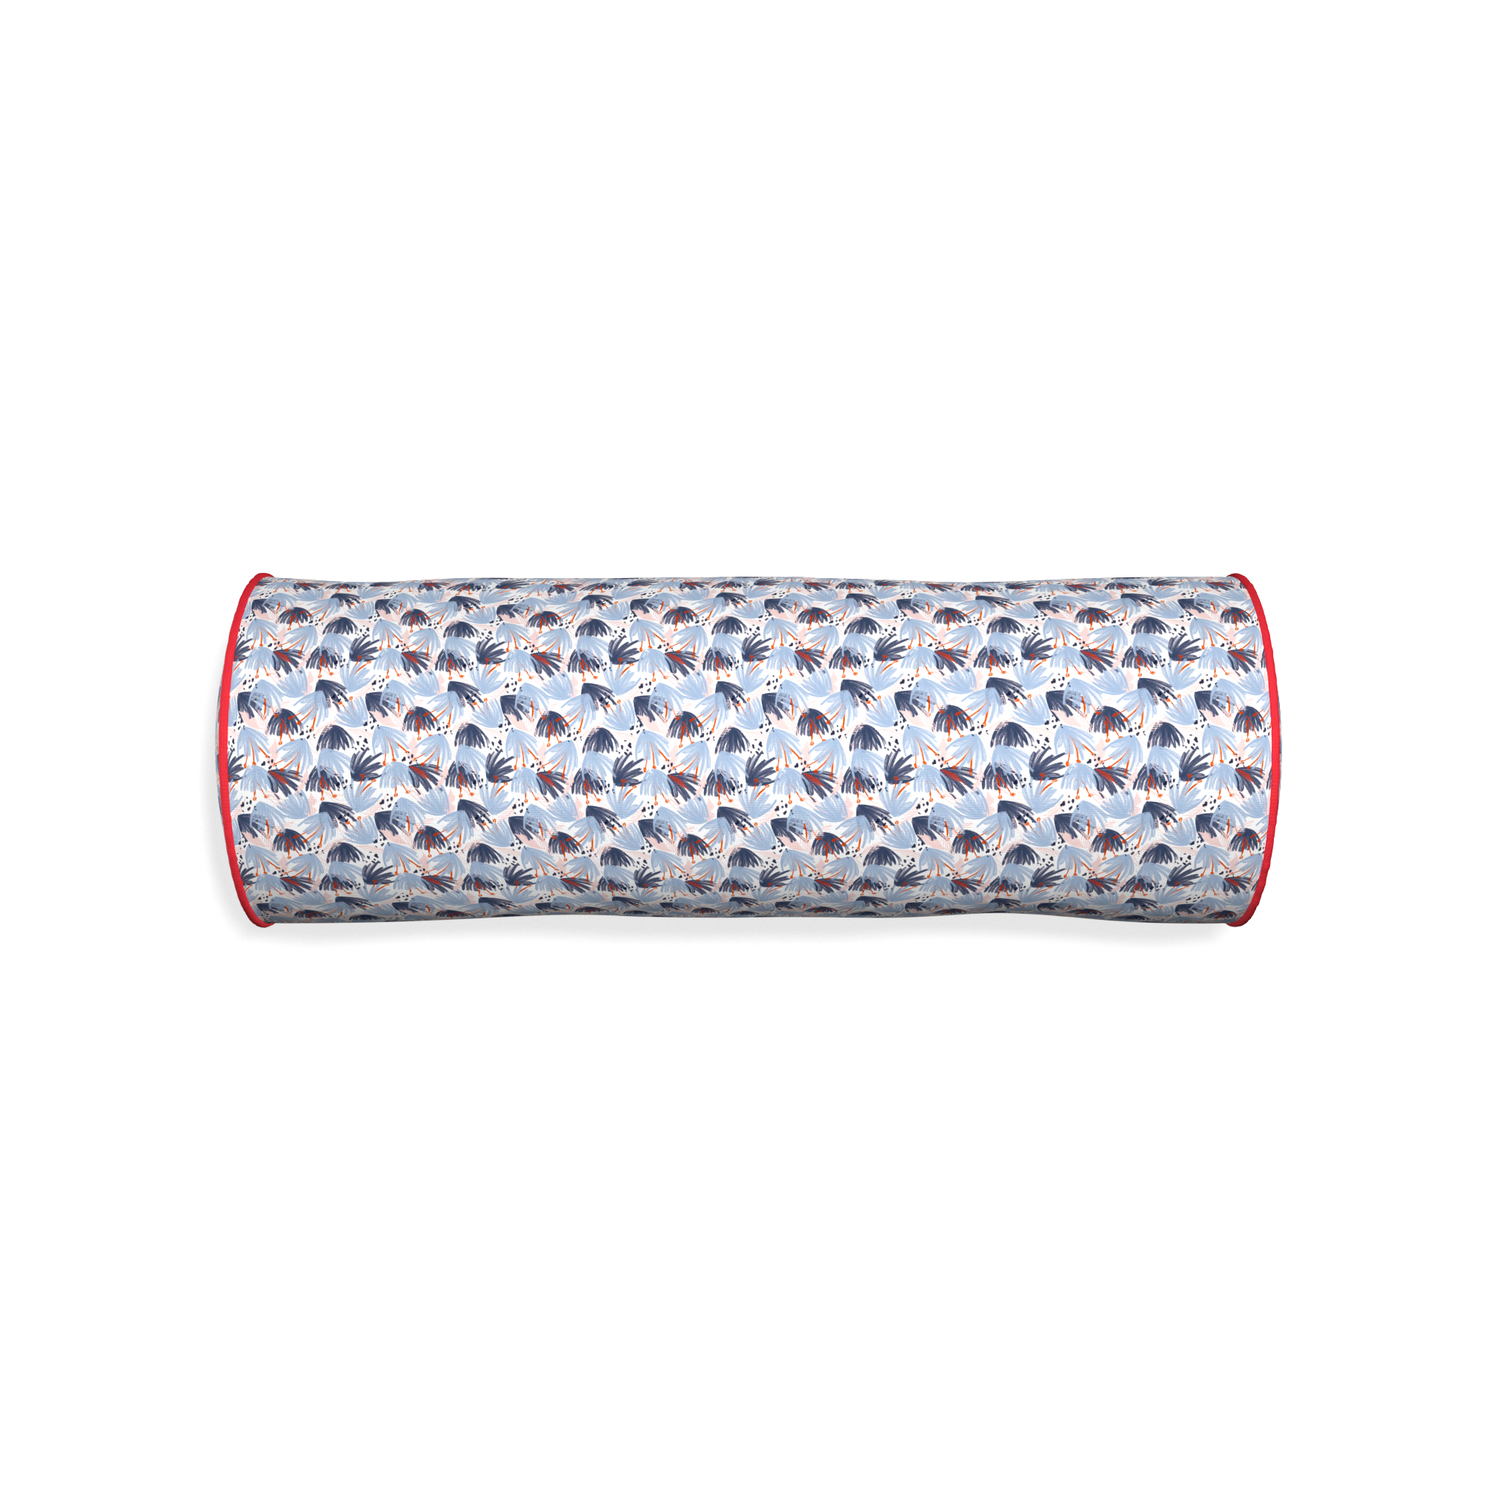 Bolster eden blue custom pillow with cherry piping on white background